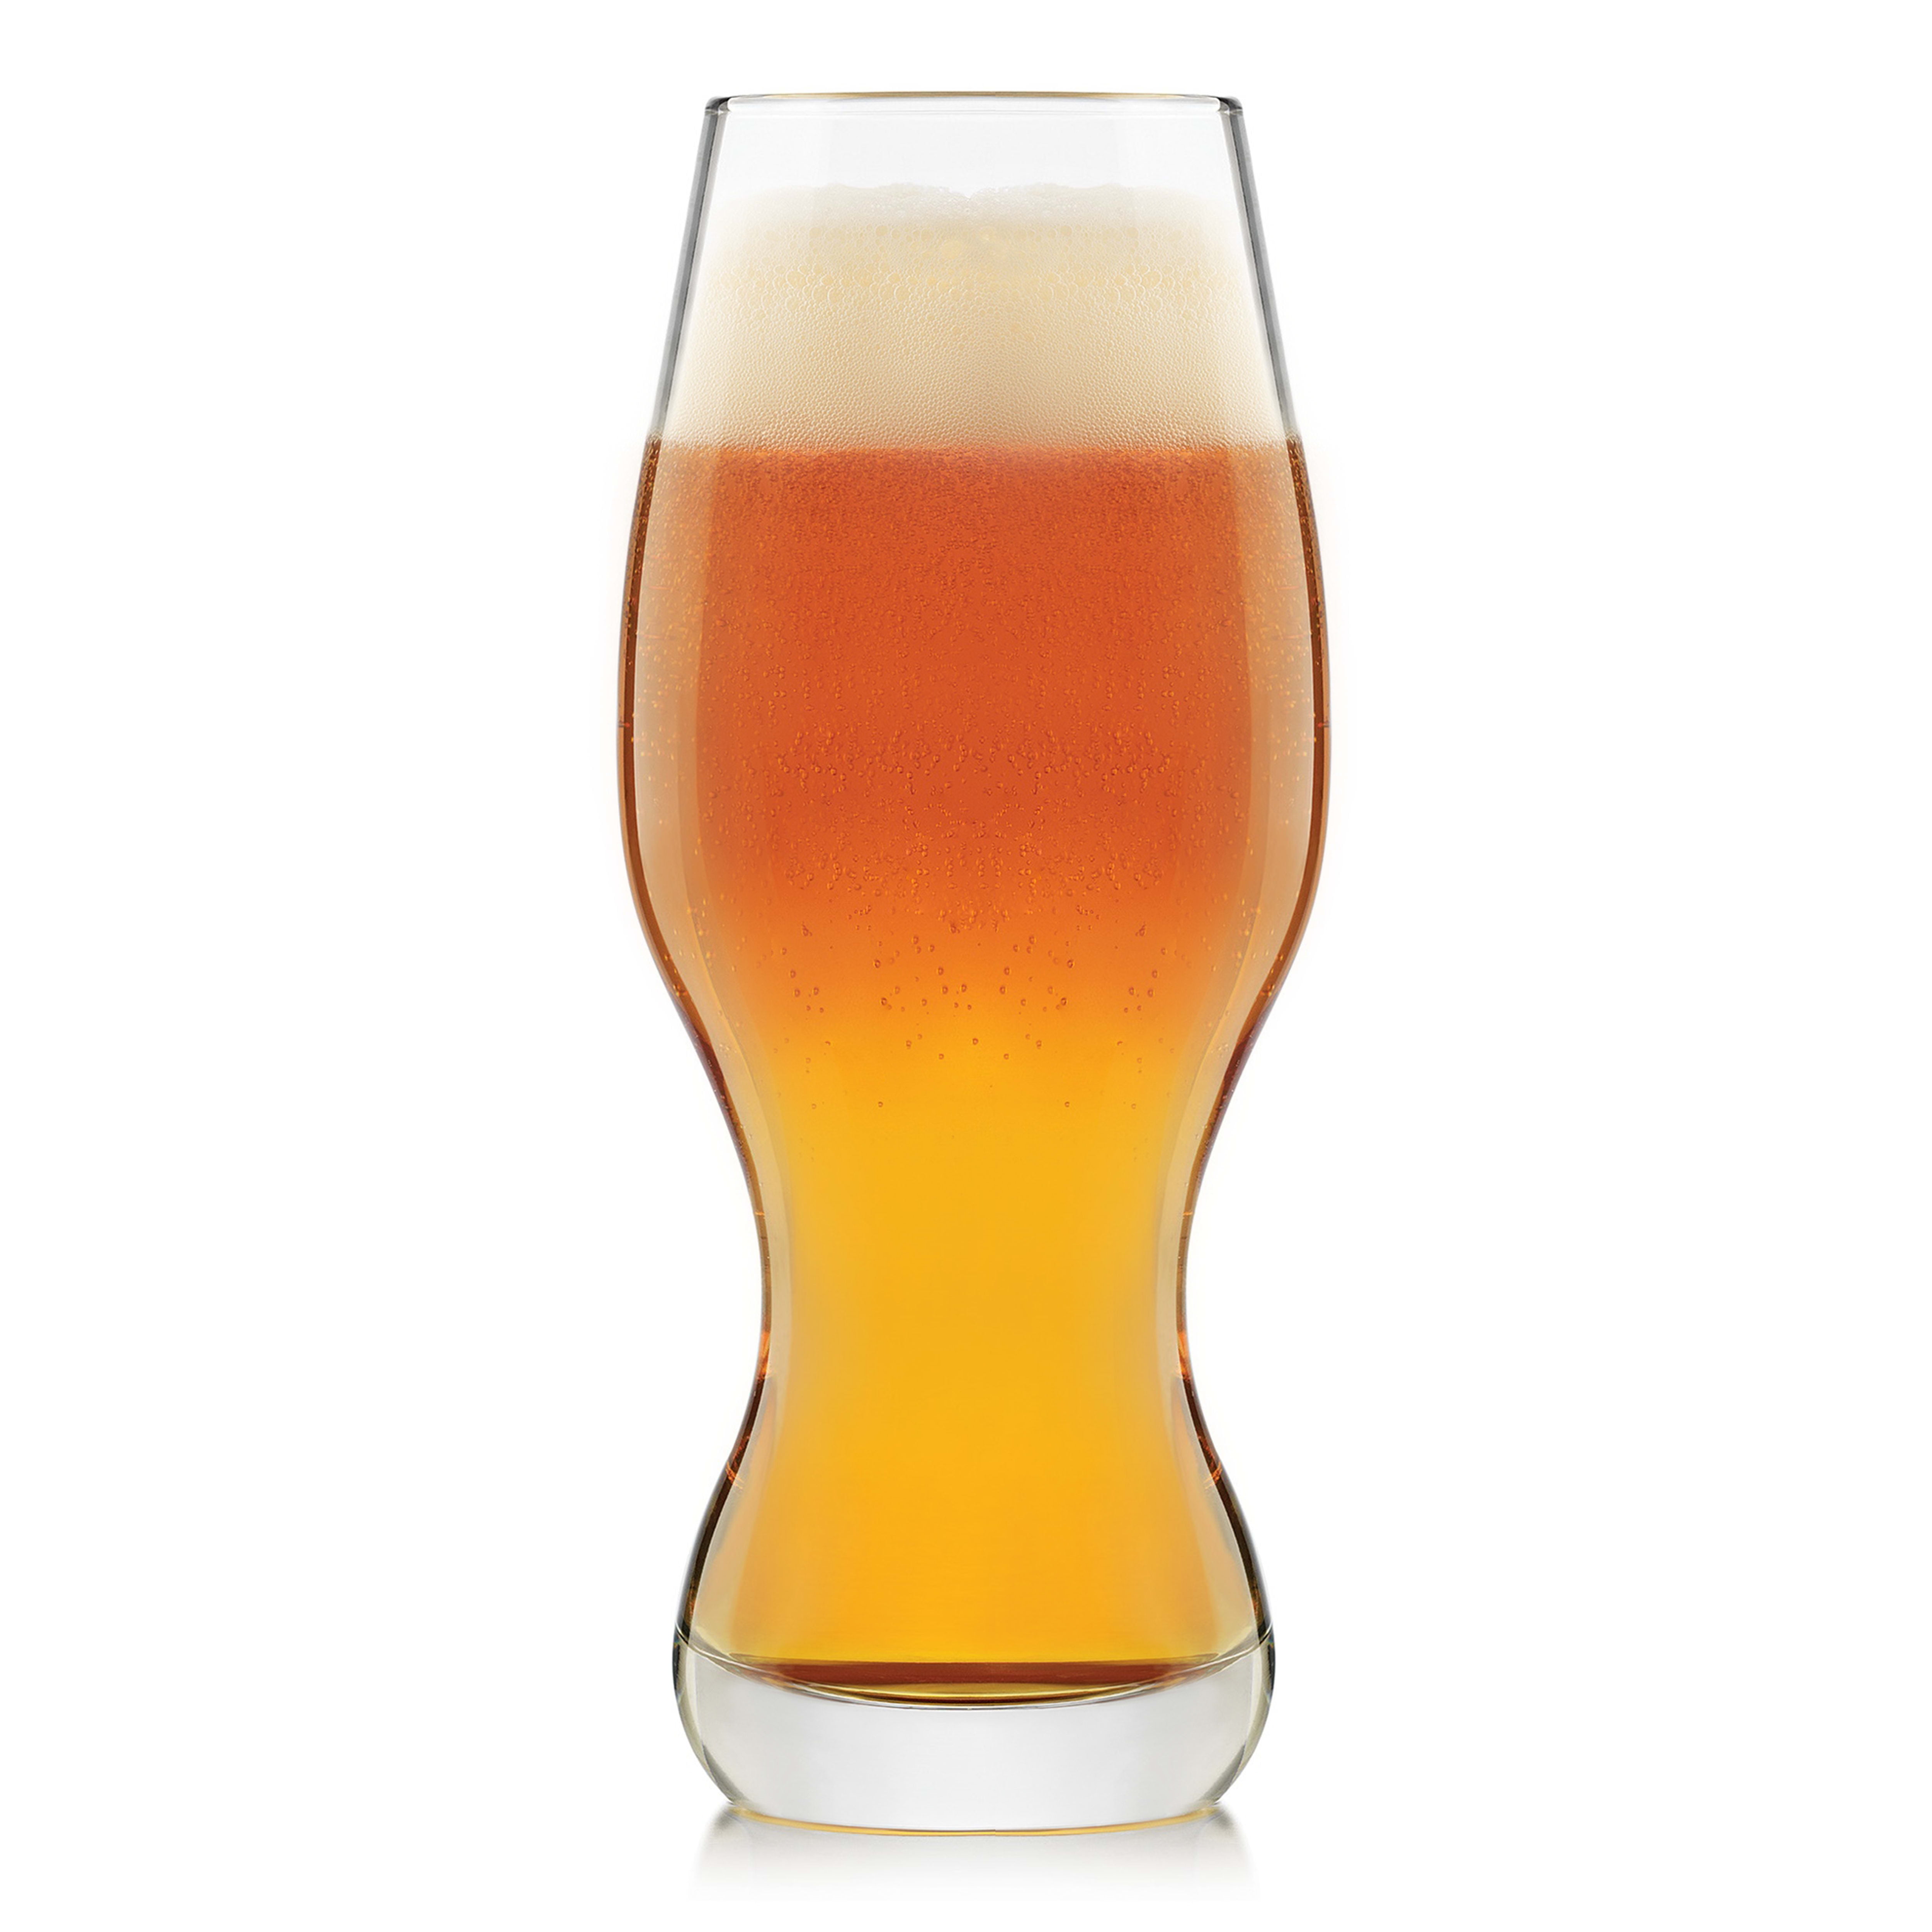 Libbey Craft Brews Nucleated Pint Beer Glasses, Set of 4 - Walmart